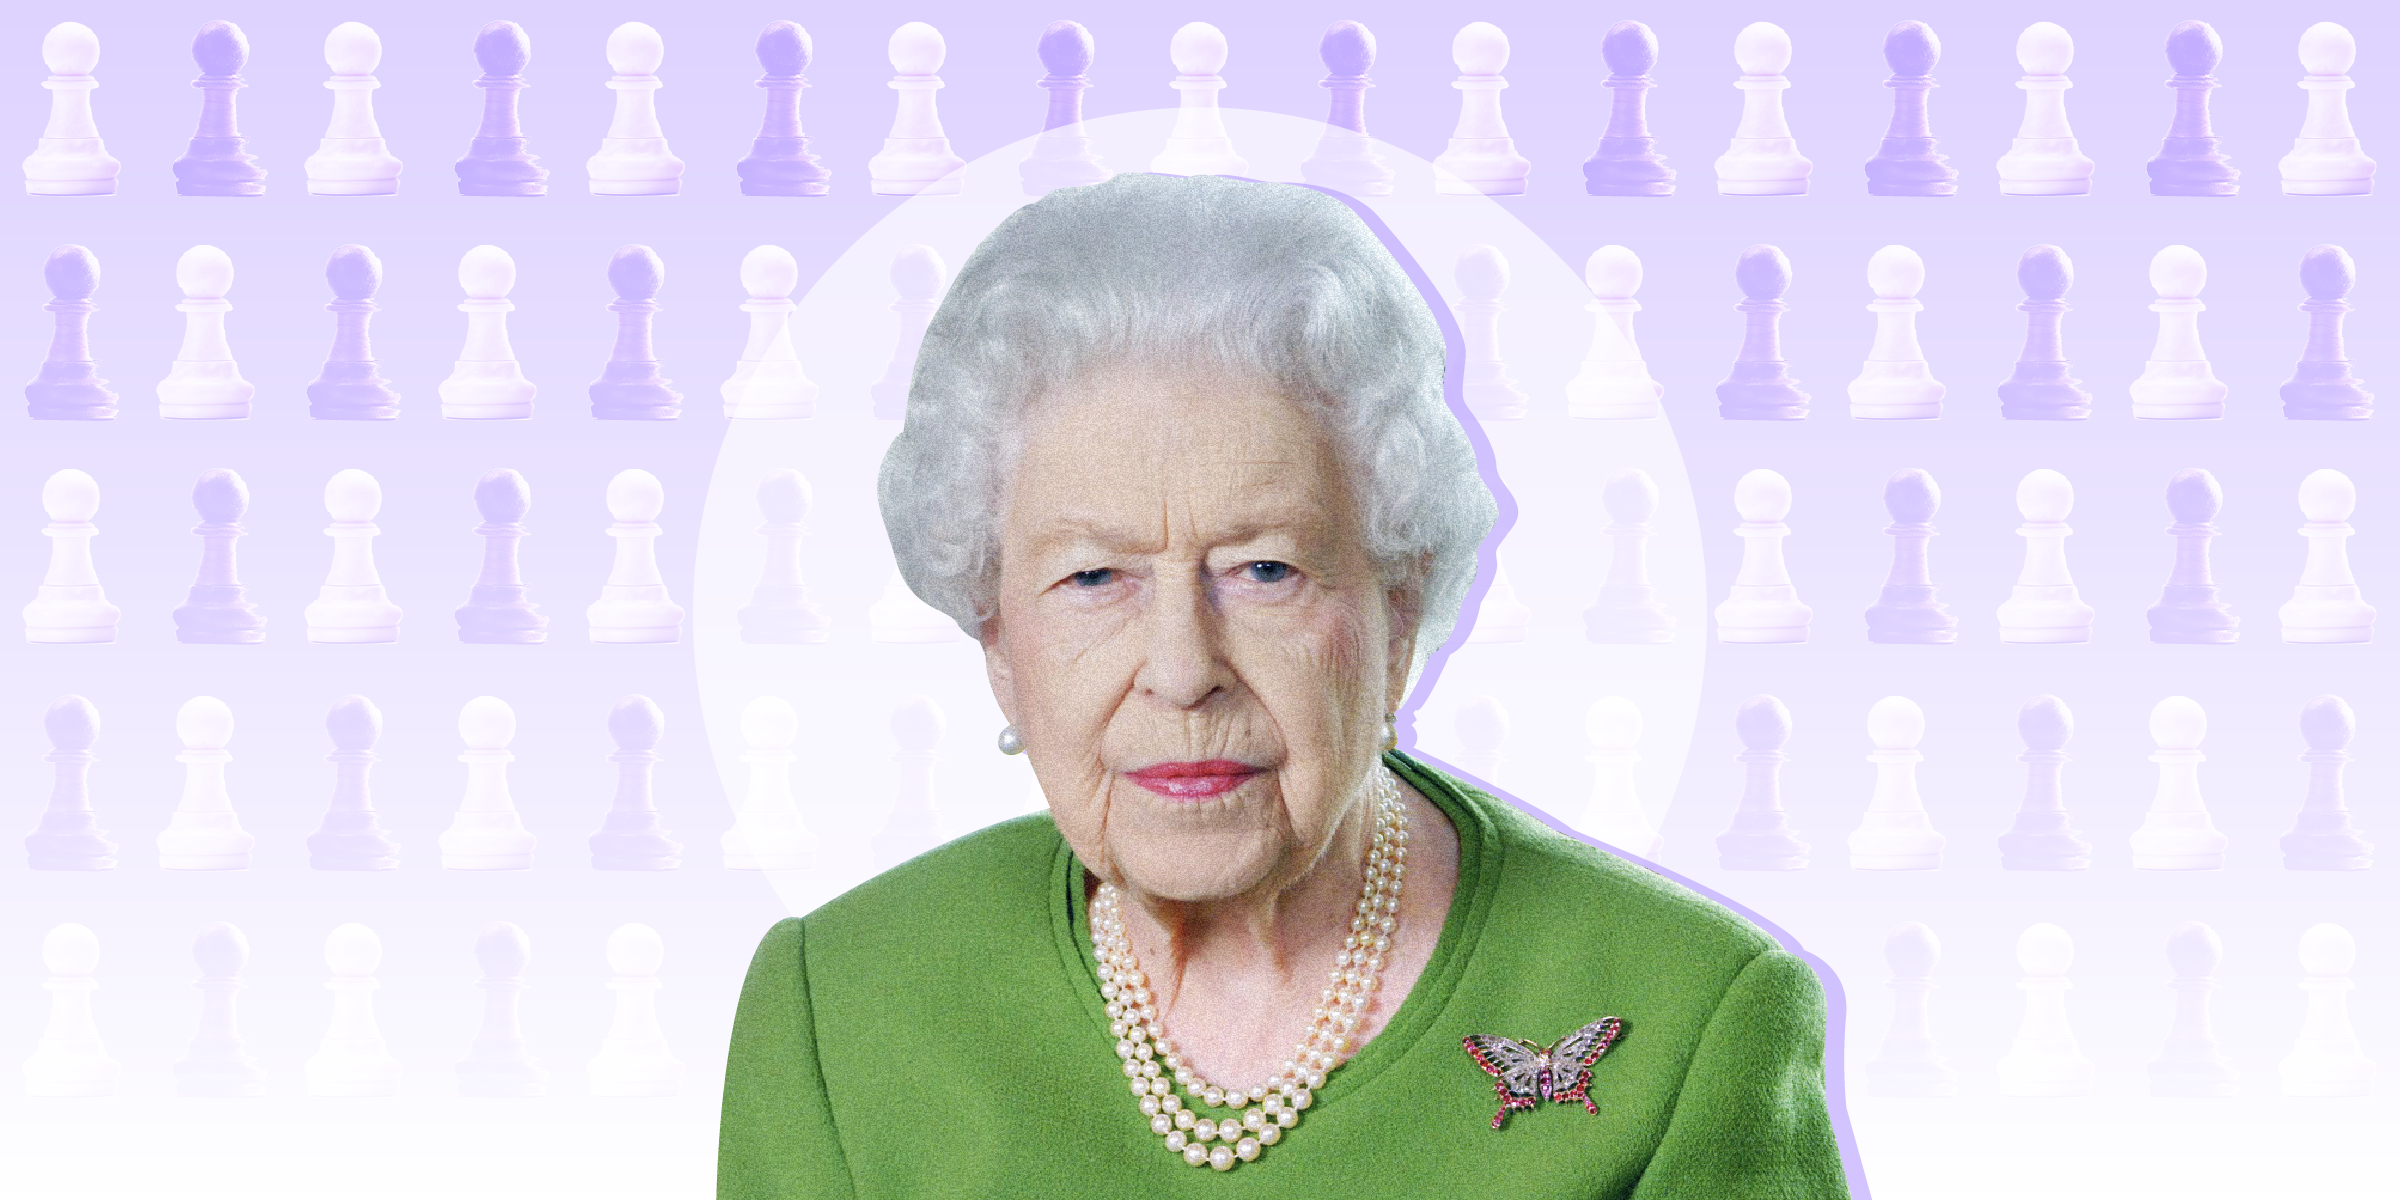 Queen Elizabeth against a purple background with chess pawns